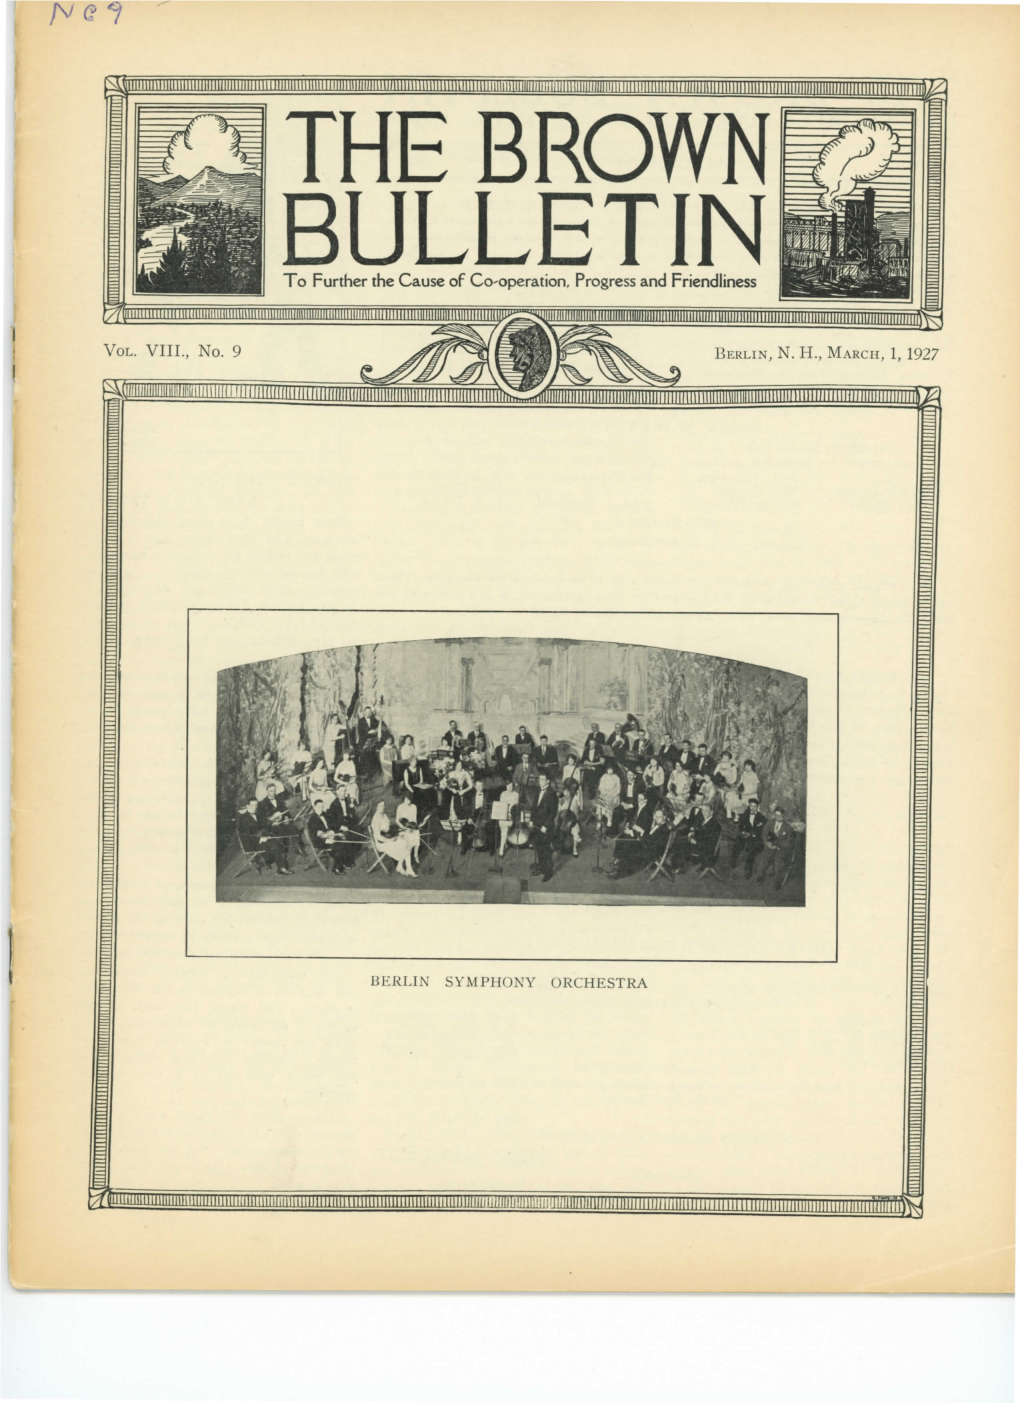 THE BROWN BULLETIN to Further the Cause of Co-Operation, Progress and Friendliness